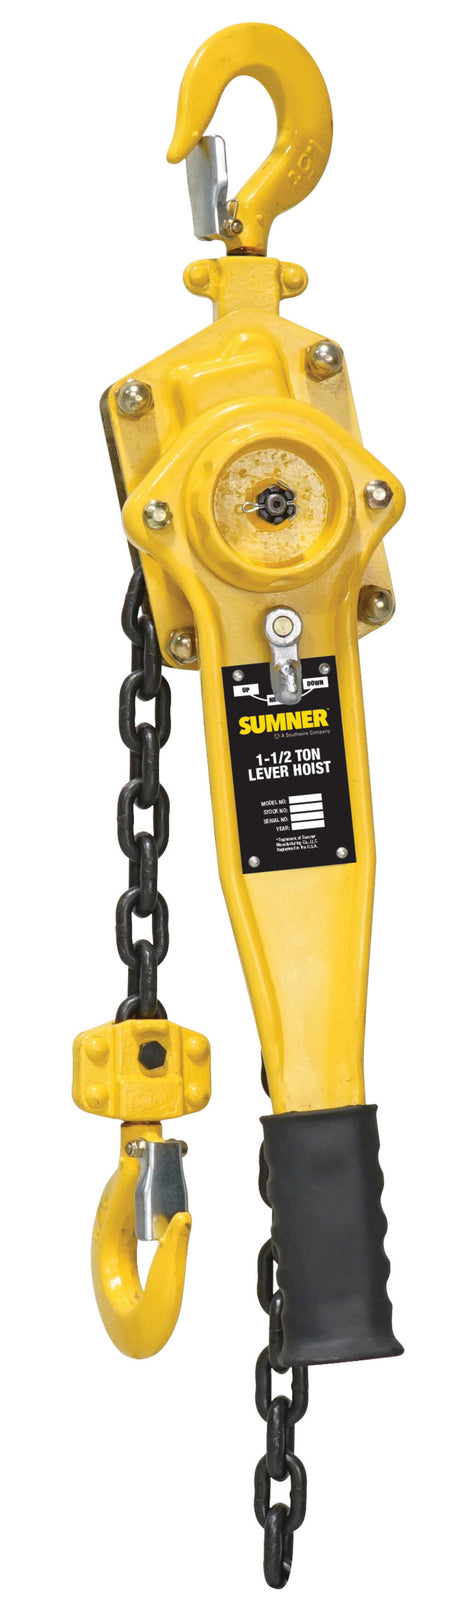 Lever Hoist 1 1/2 Ton with 10' Chain Fall 787547